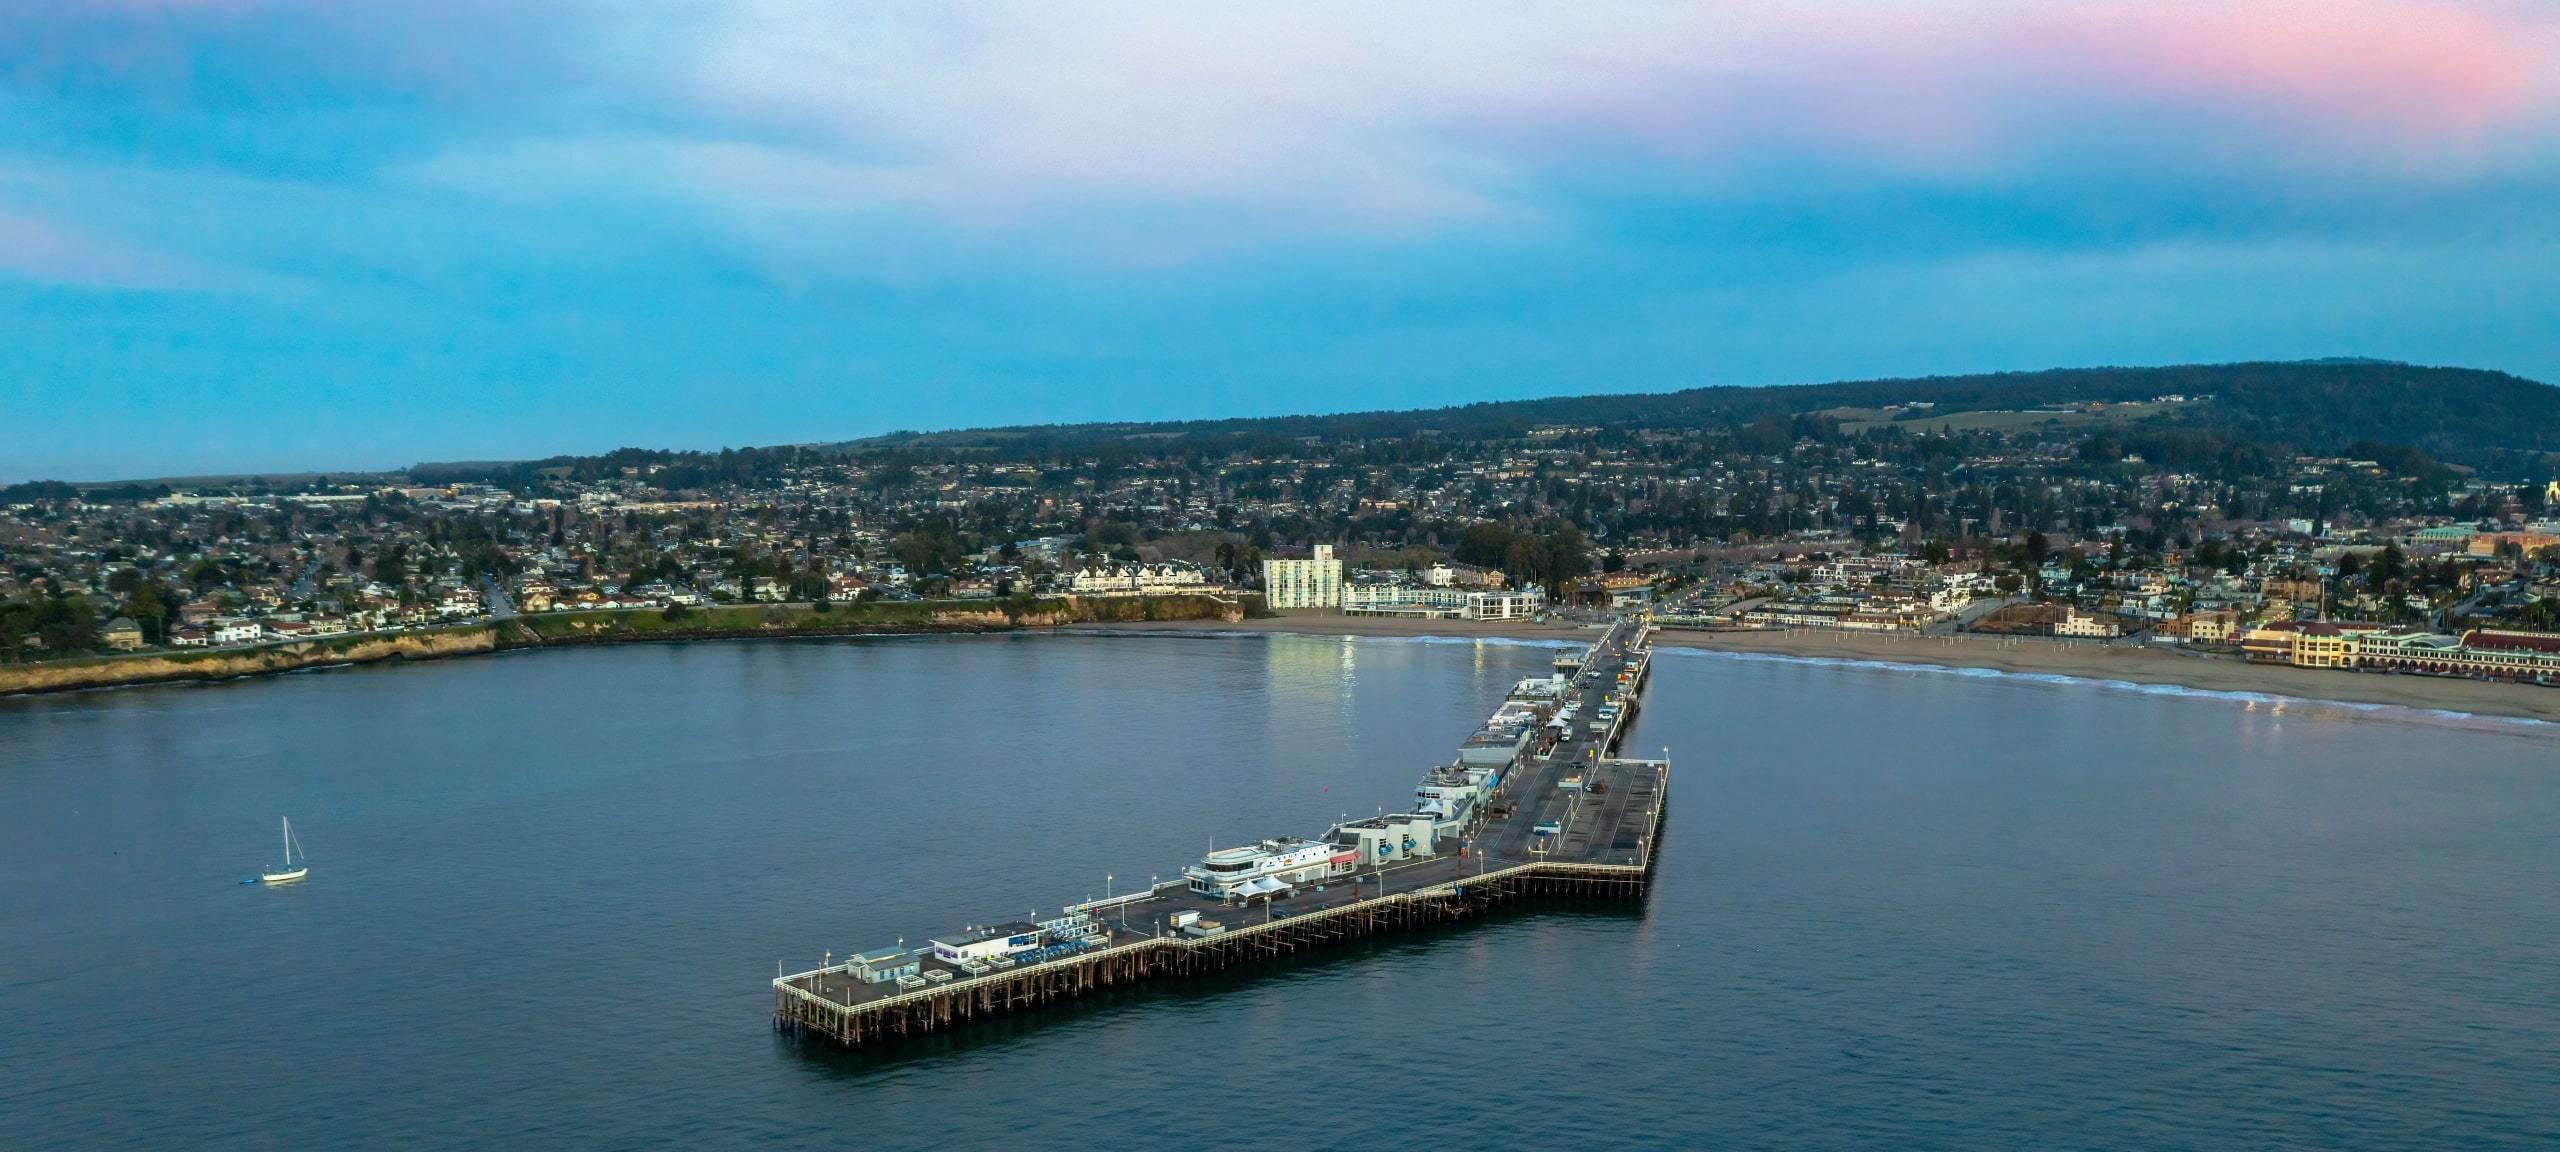 View over Santa Cruz Wharf and waterfront with blue and pink clouds